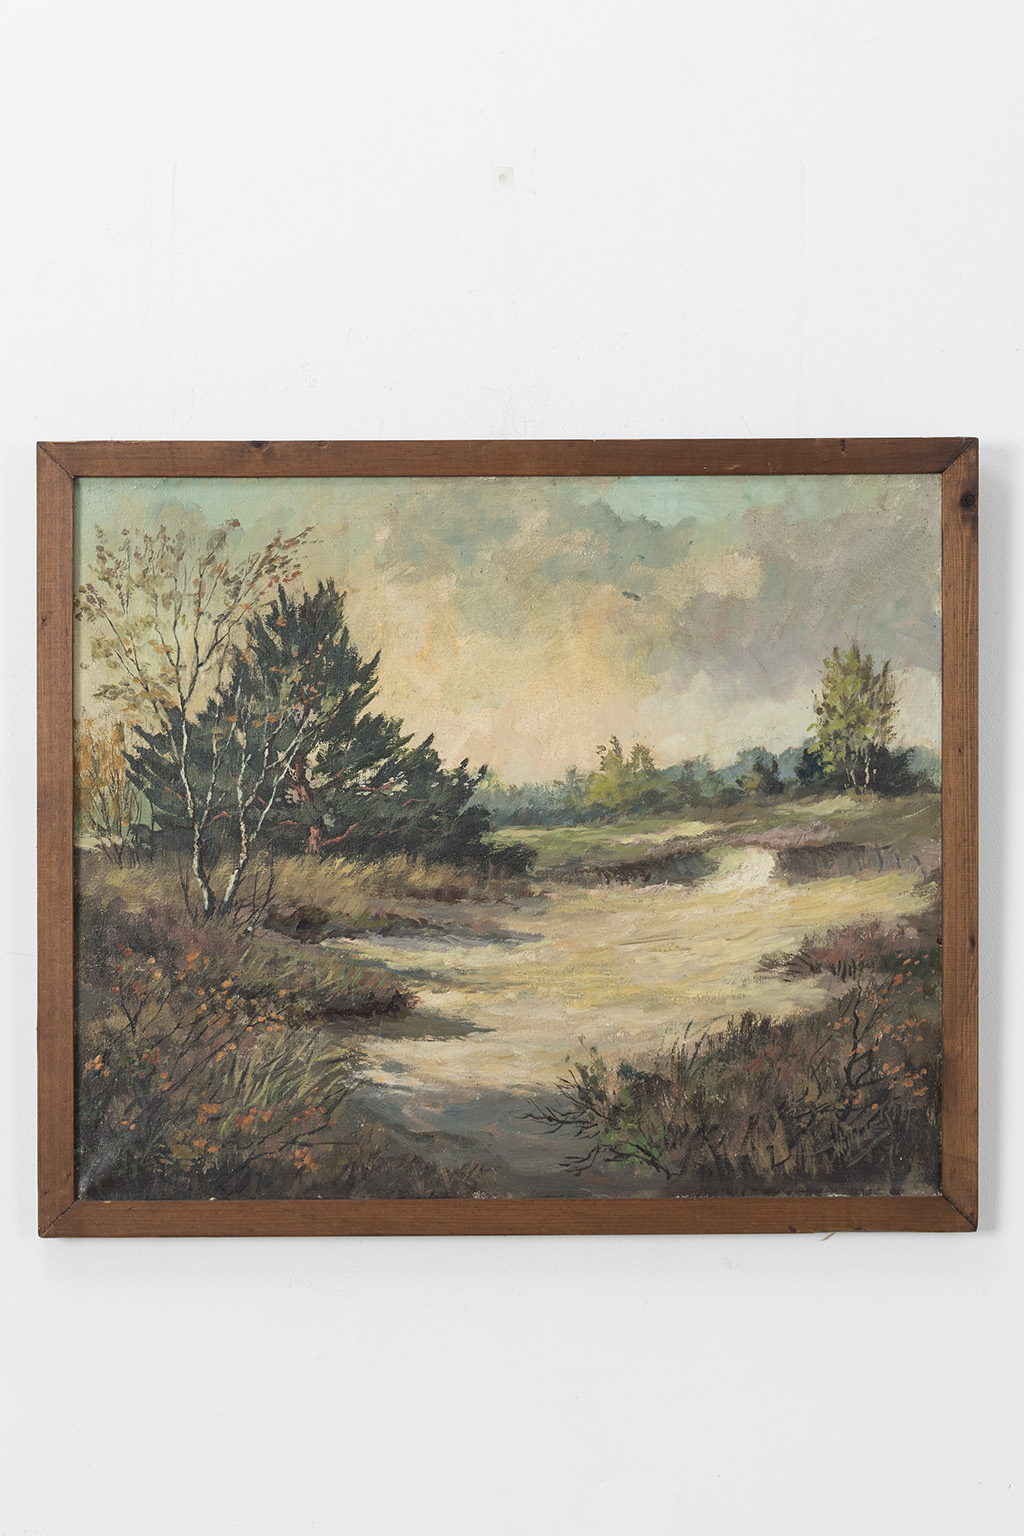 Painting of natural landscape